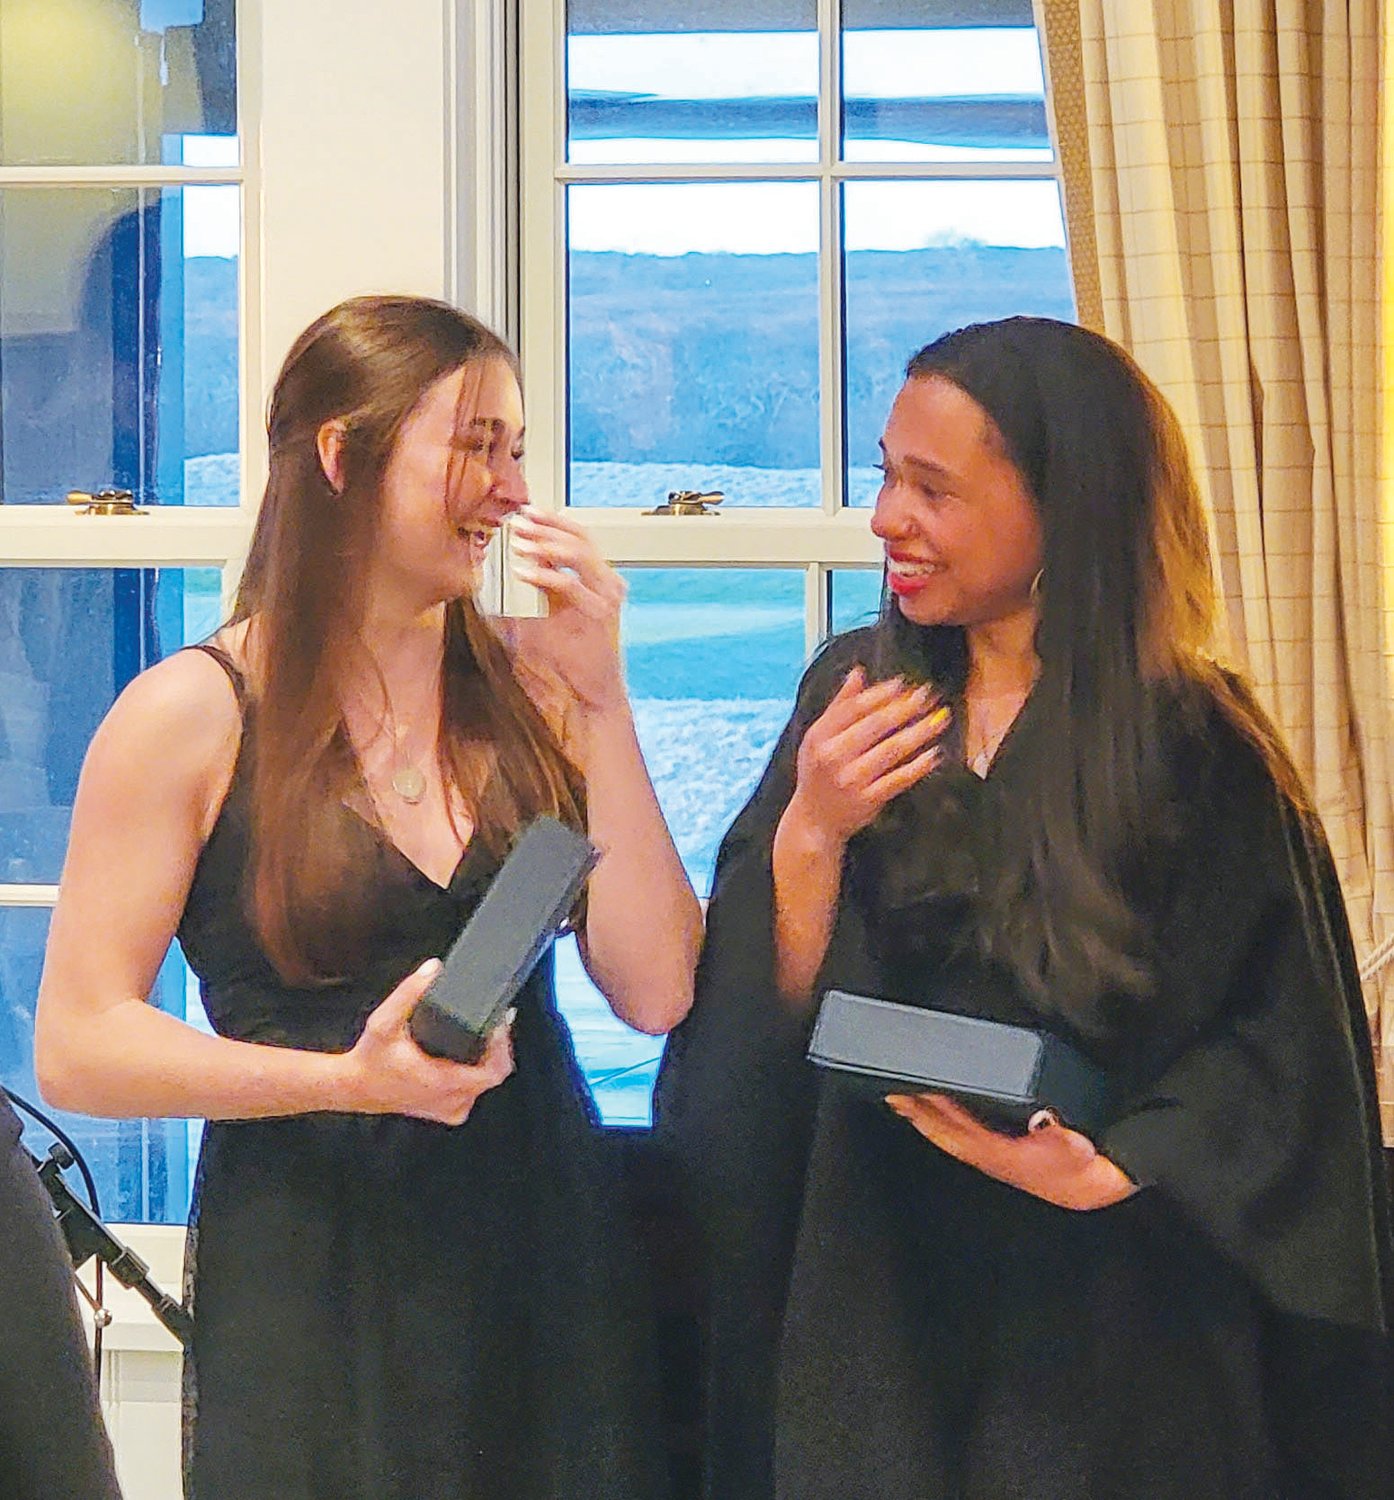 Sarah Hanlon, left, and Maryann Vasquez-Cruz were overcome with joy last Wednesday on learning they had each won a four-year full-tuition scholarship to the college of their choice. Hanlon is deciding between Providence College and Bates College, while Vasquez-Cruz’s choices are Massachusetts College of Pharmacy or Duke University in China.